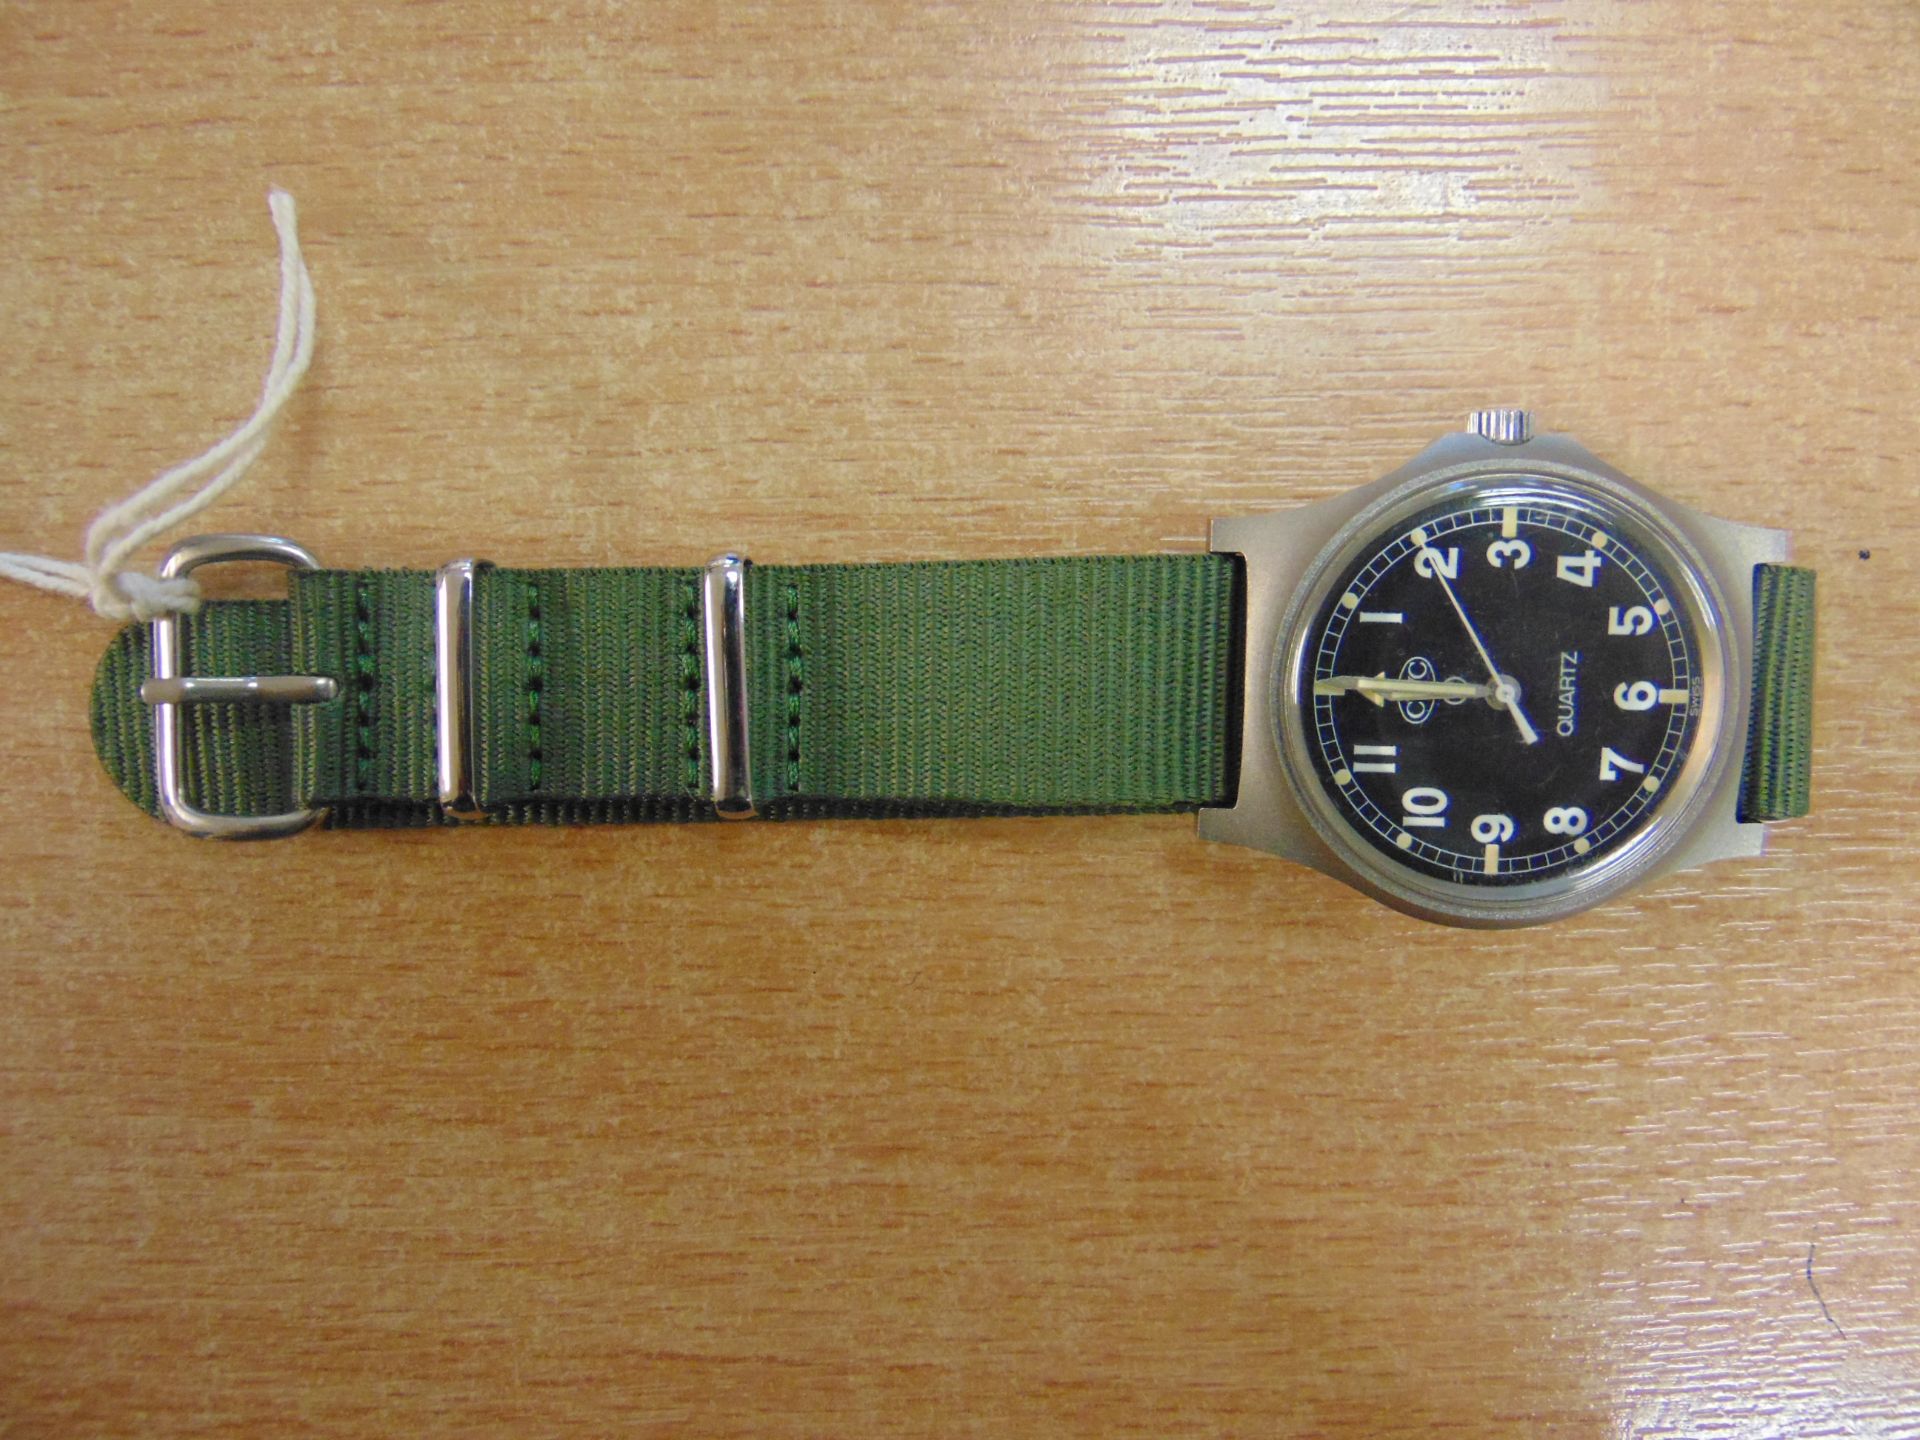 VERY RARE UNISSUED CWC W10 FAT BOY SERVICE WATCH NATO MARKED DATED 1982 - FALKLANDS WAR